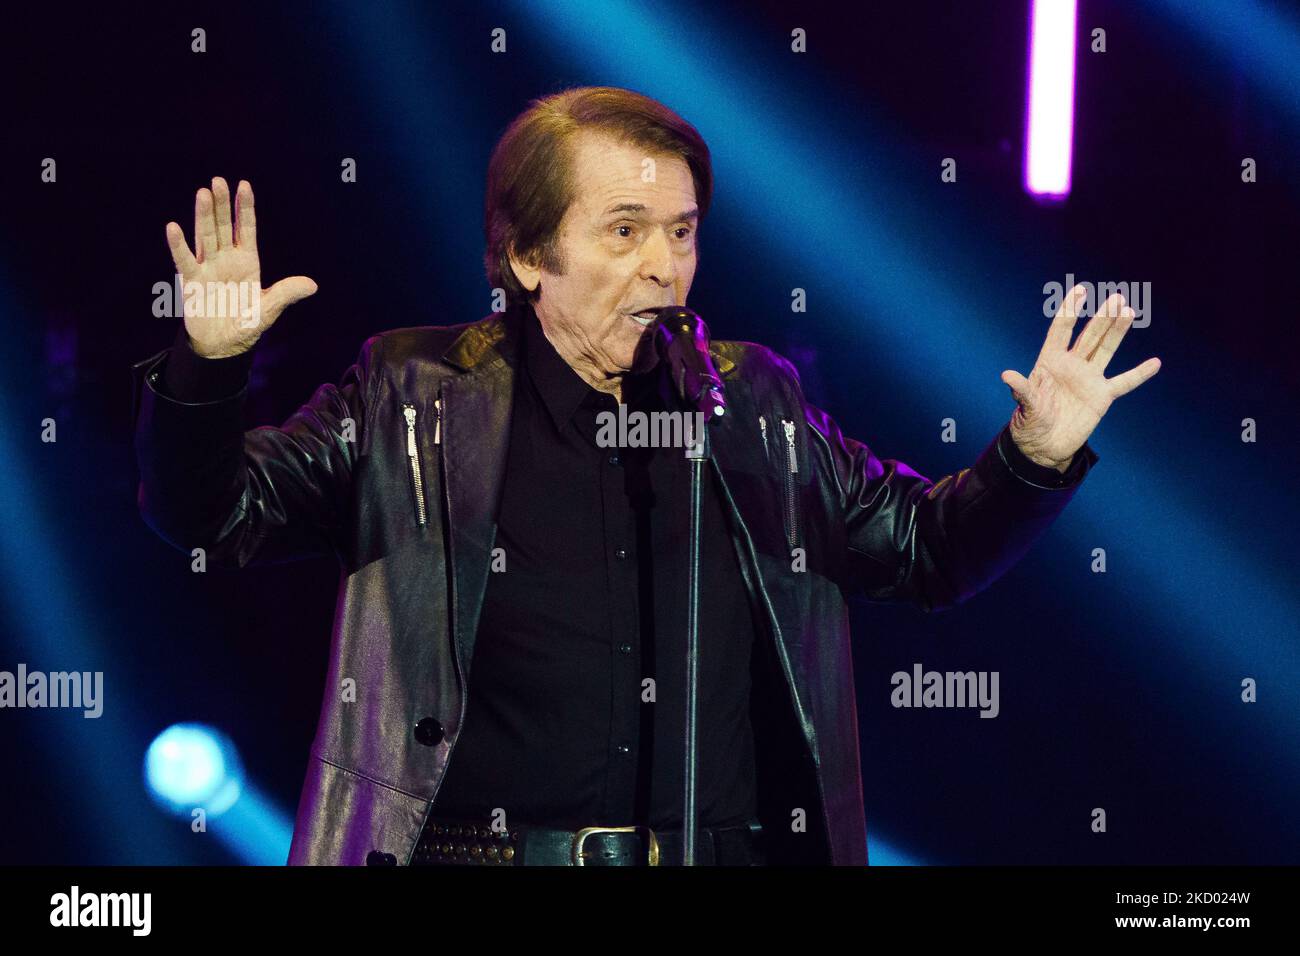 Spanish singer Raphael performs on stage during 'Mas Fuertes que el Volcan' charity concert at Wizink Center on January 08, 2022 in Madrid, Spain. The concert is organized by RTVE in collaboration with the Association of Musical Promoters and the proceeds will go to those affected by the Cumbre Vieja volcano at La Palma, Spain. (Photo by Oscar Gonzalez/NurPhoto) Stock Photo